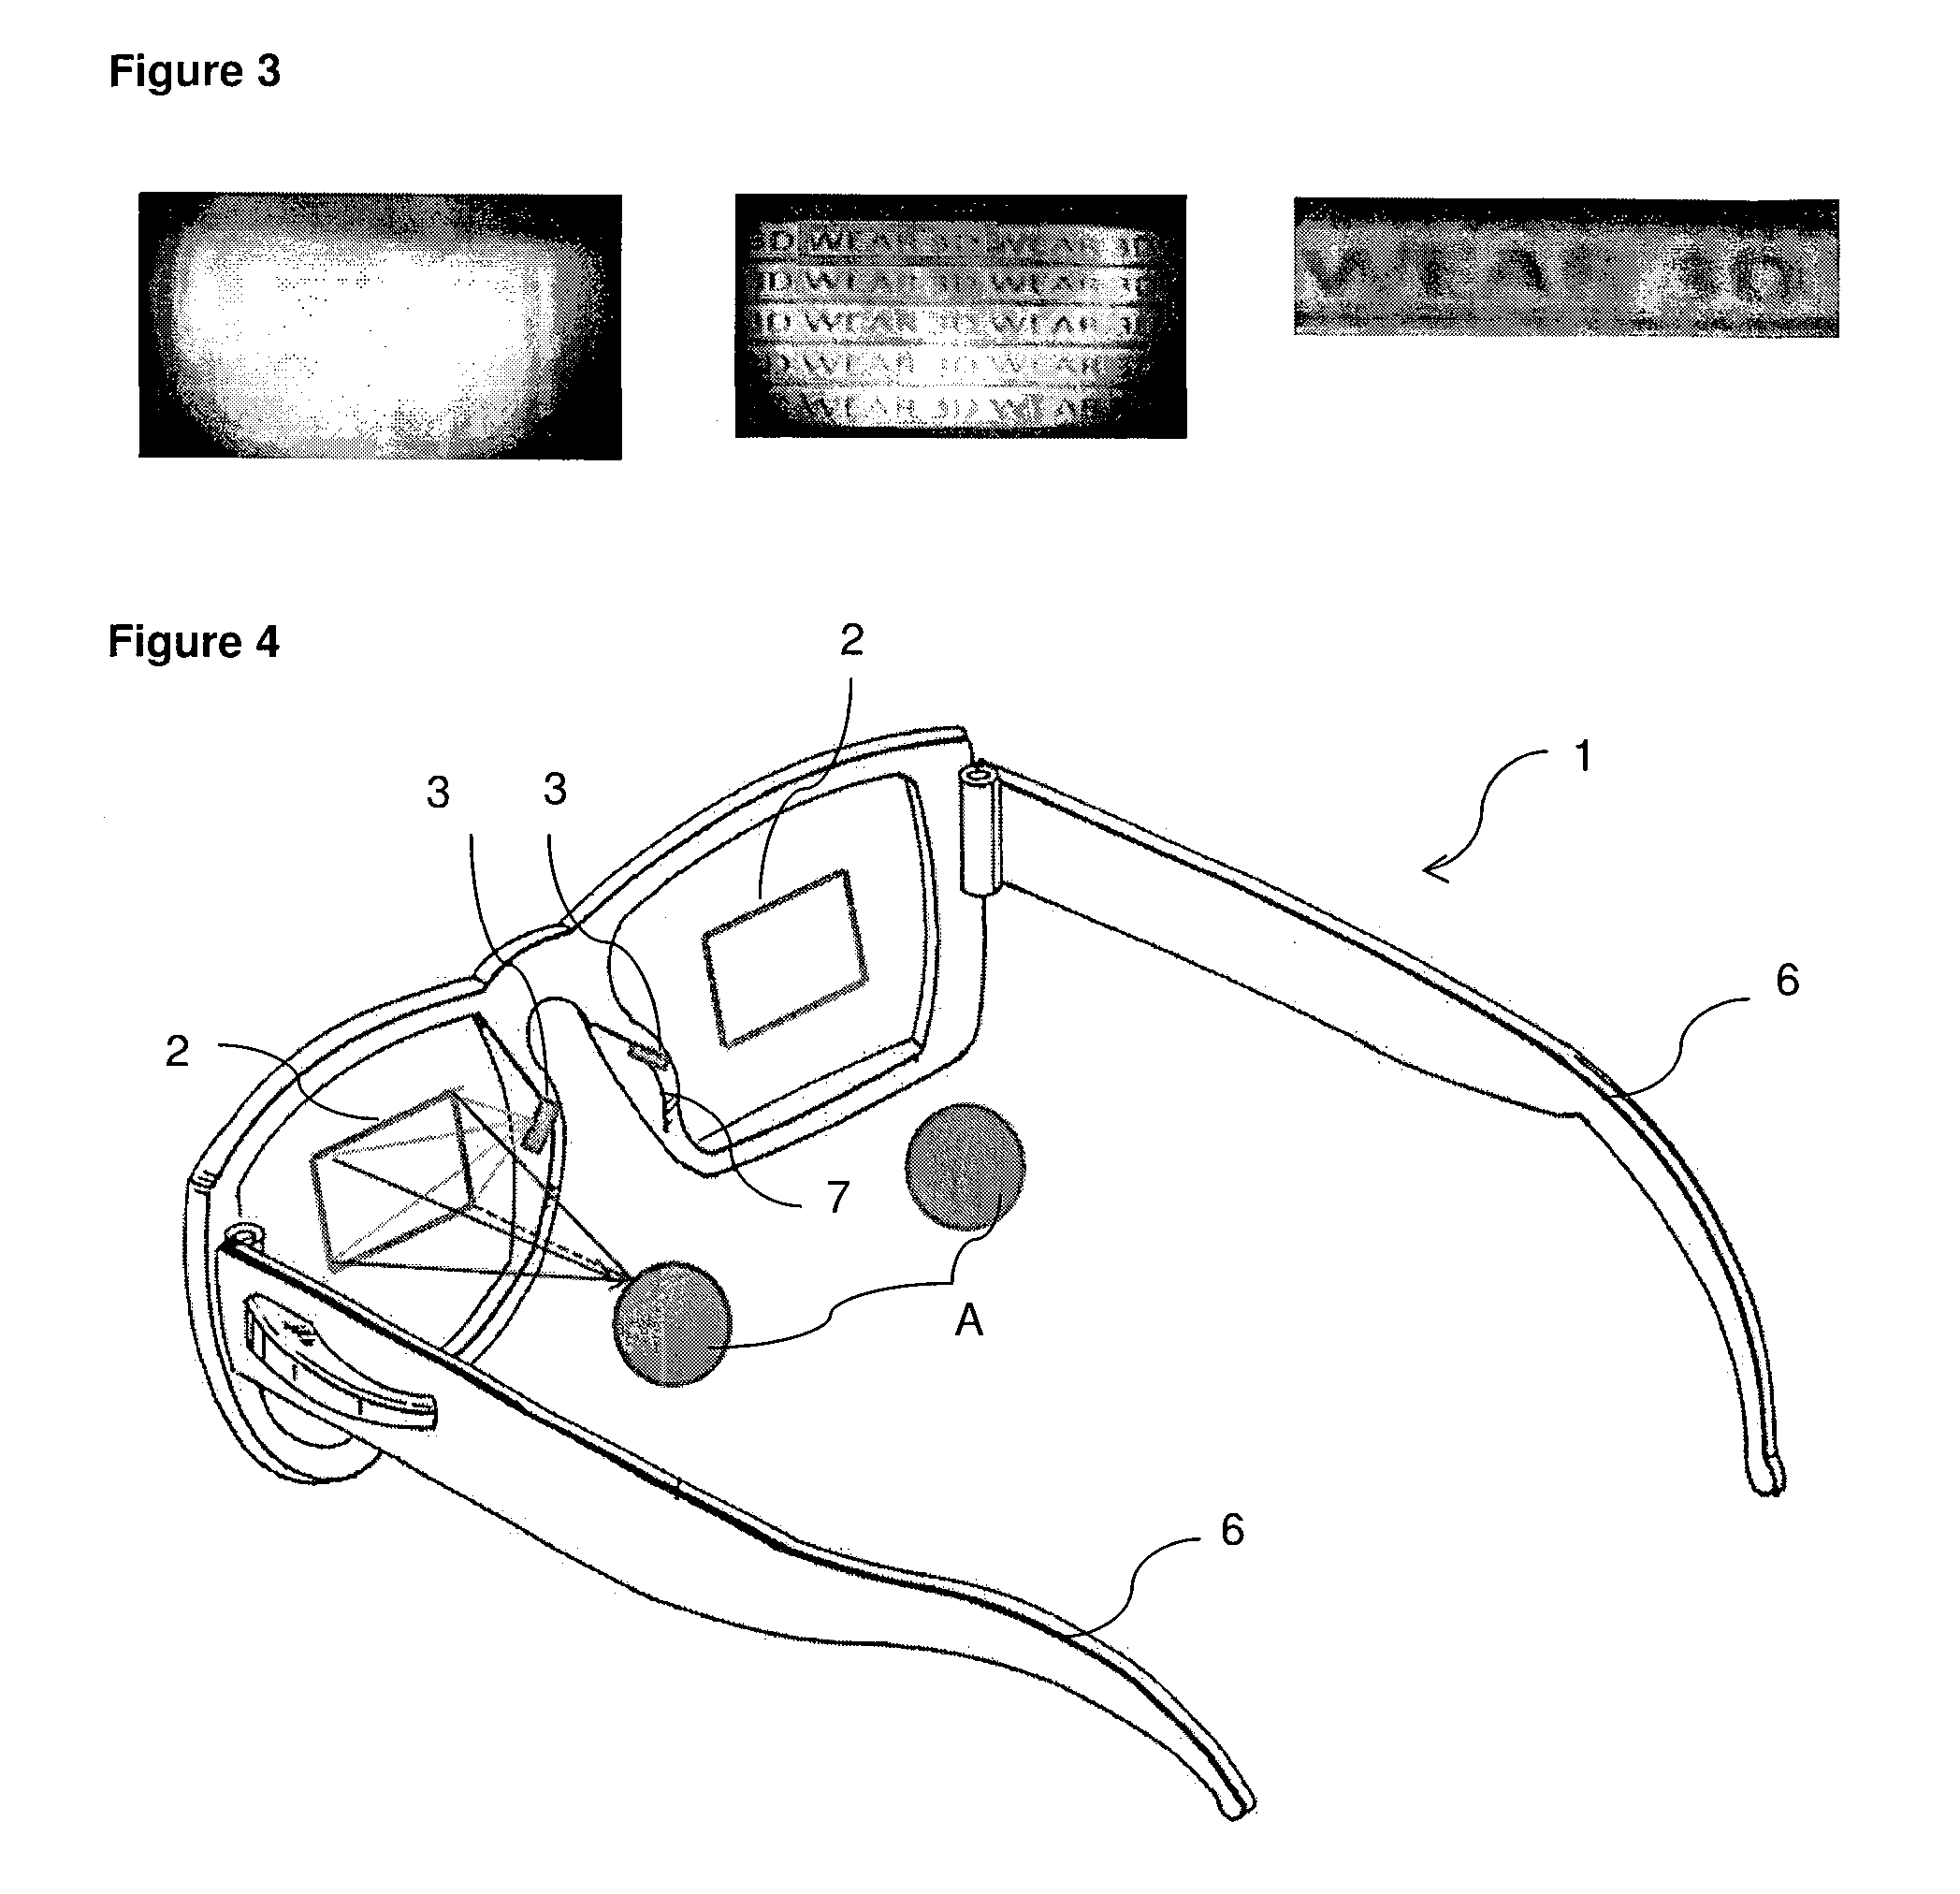 Image display device in the form of a pair of eye glasses comprising micro reflectors